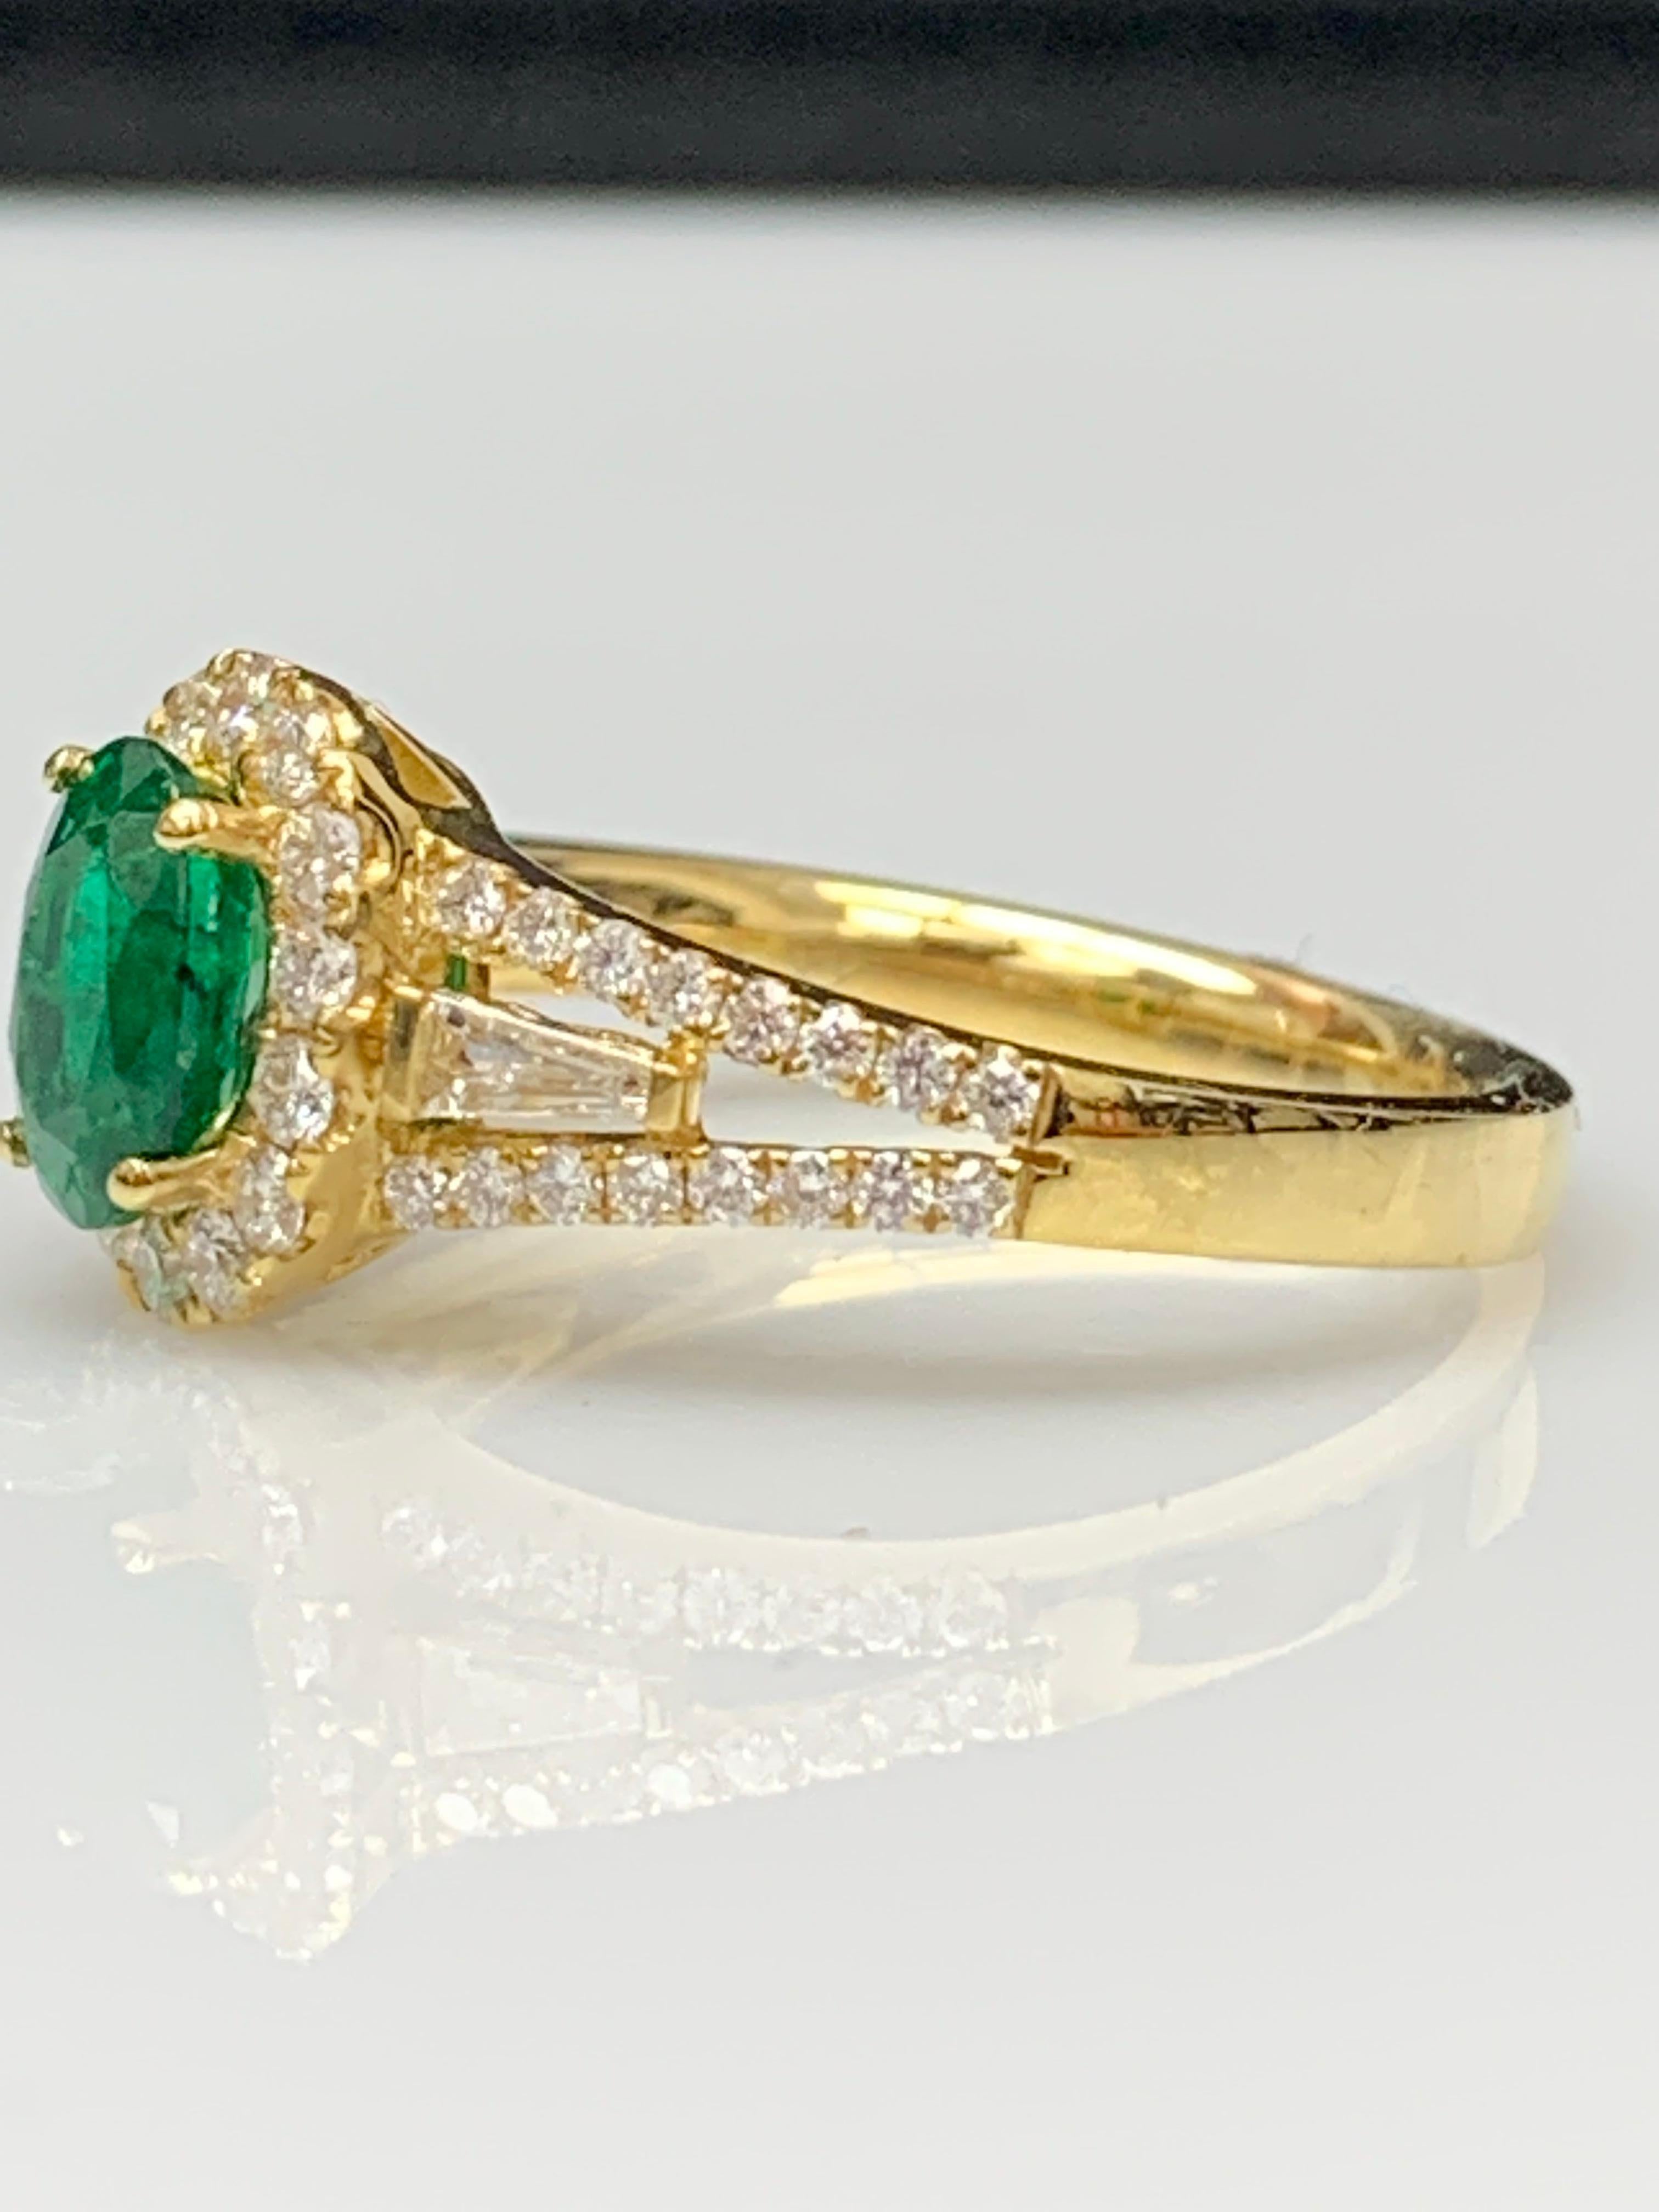 0.73 Carat Oval Cut Emerald and Diamond Ring in 18k Yellow Gold For Sale 9